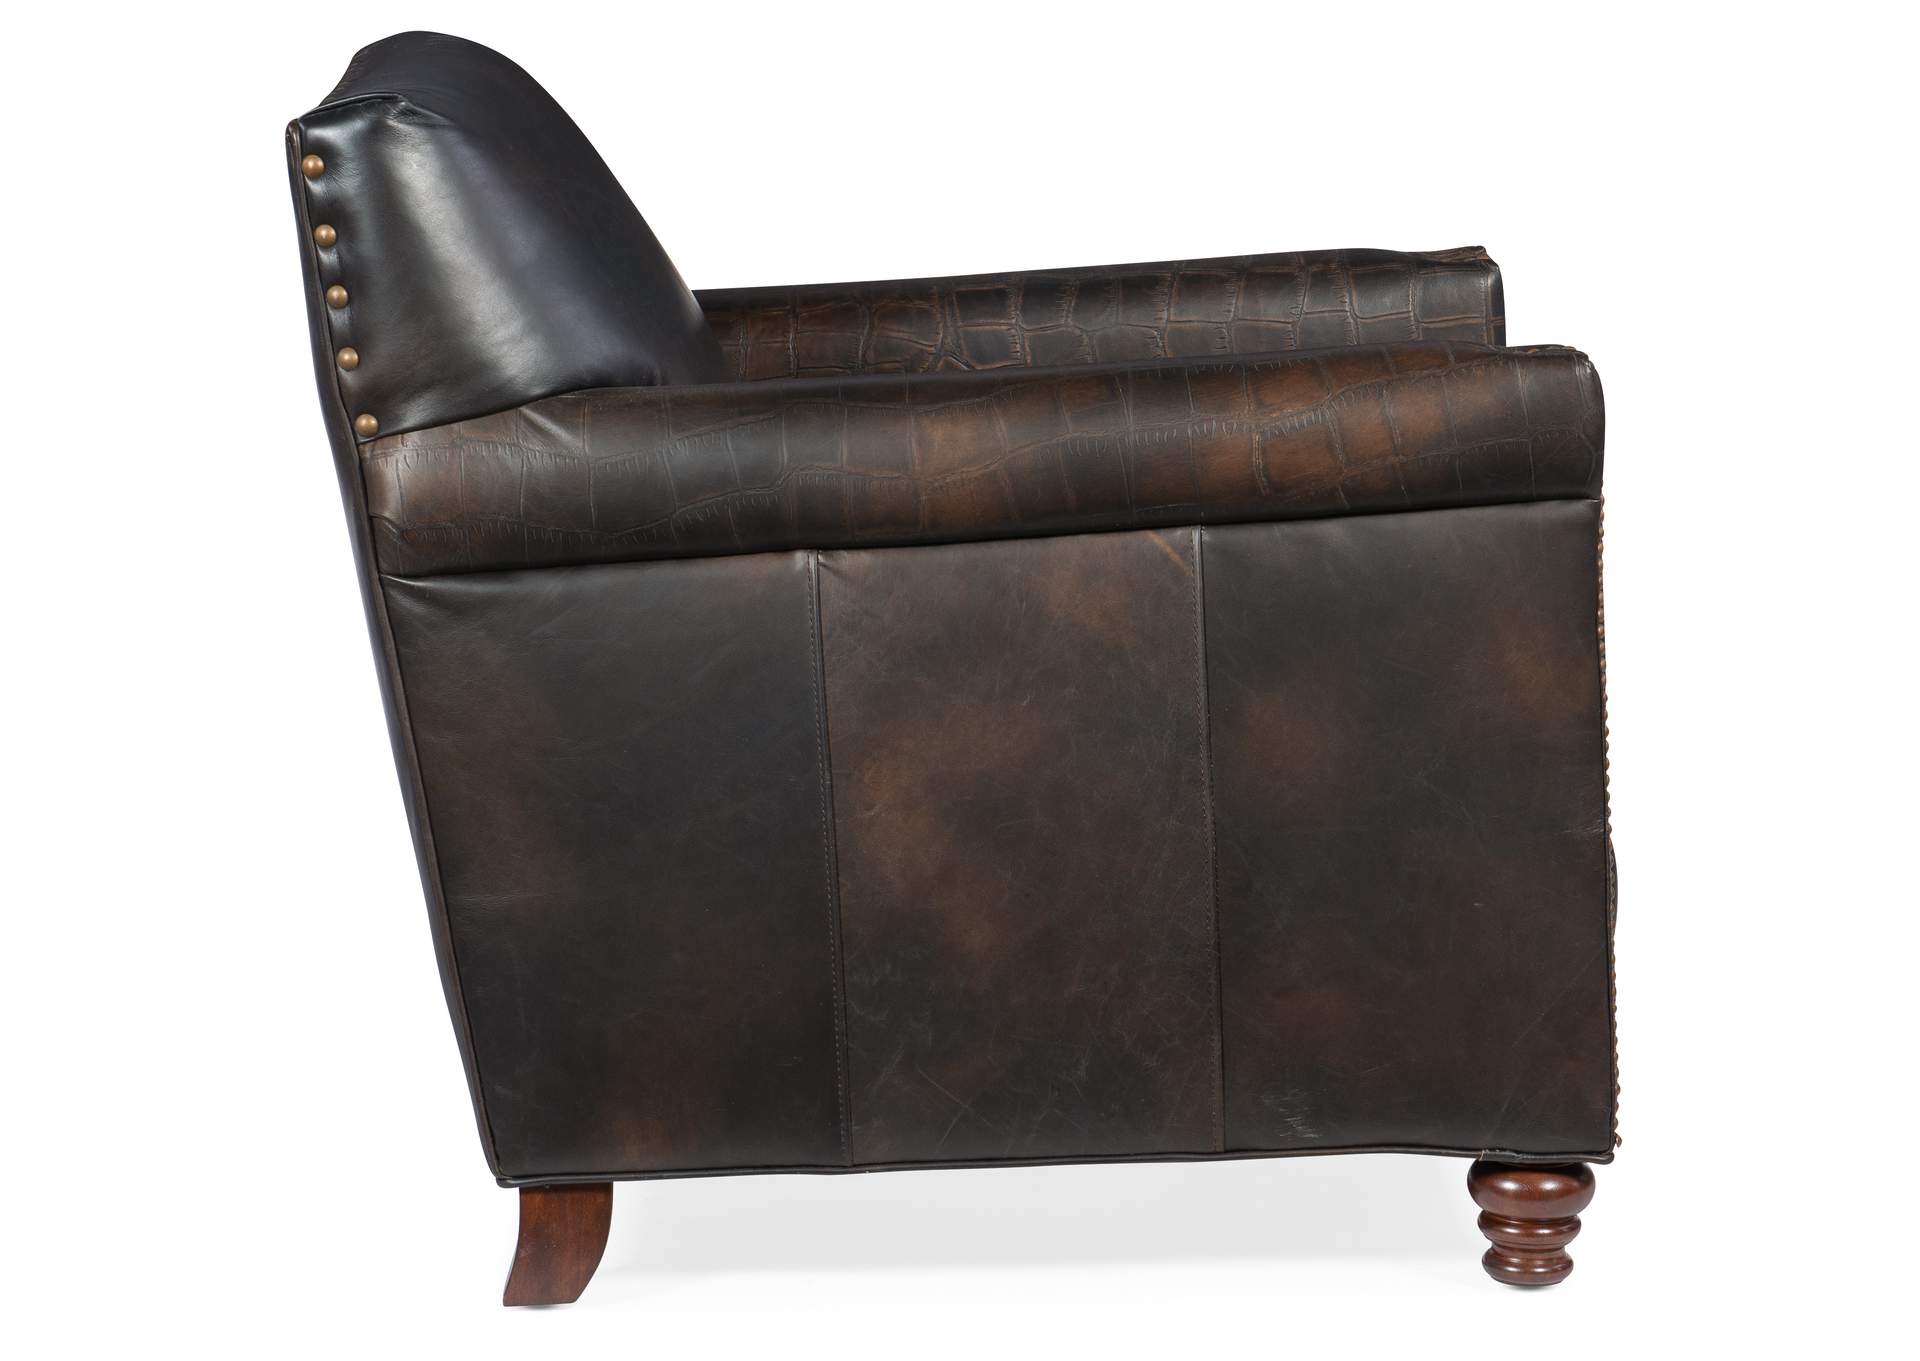 Potter Club Chair,Hooker Furniture